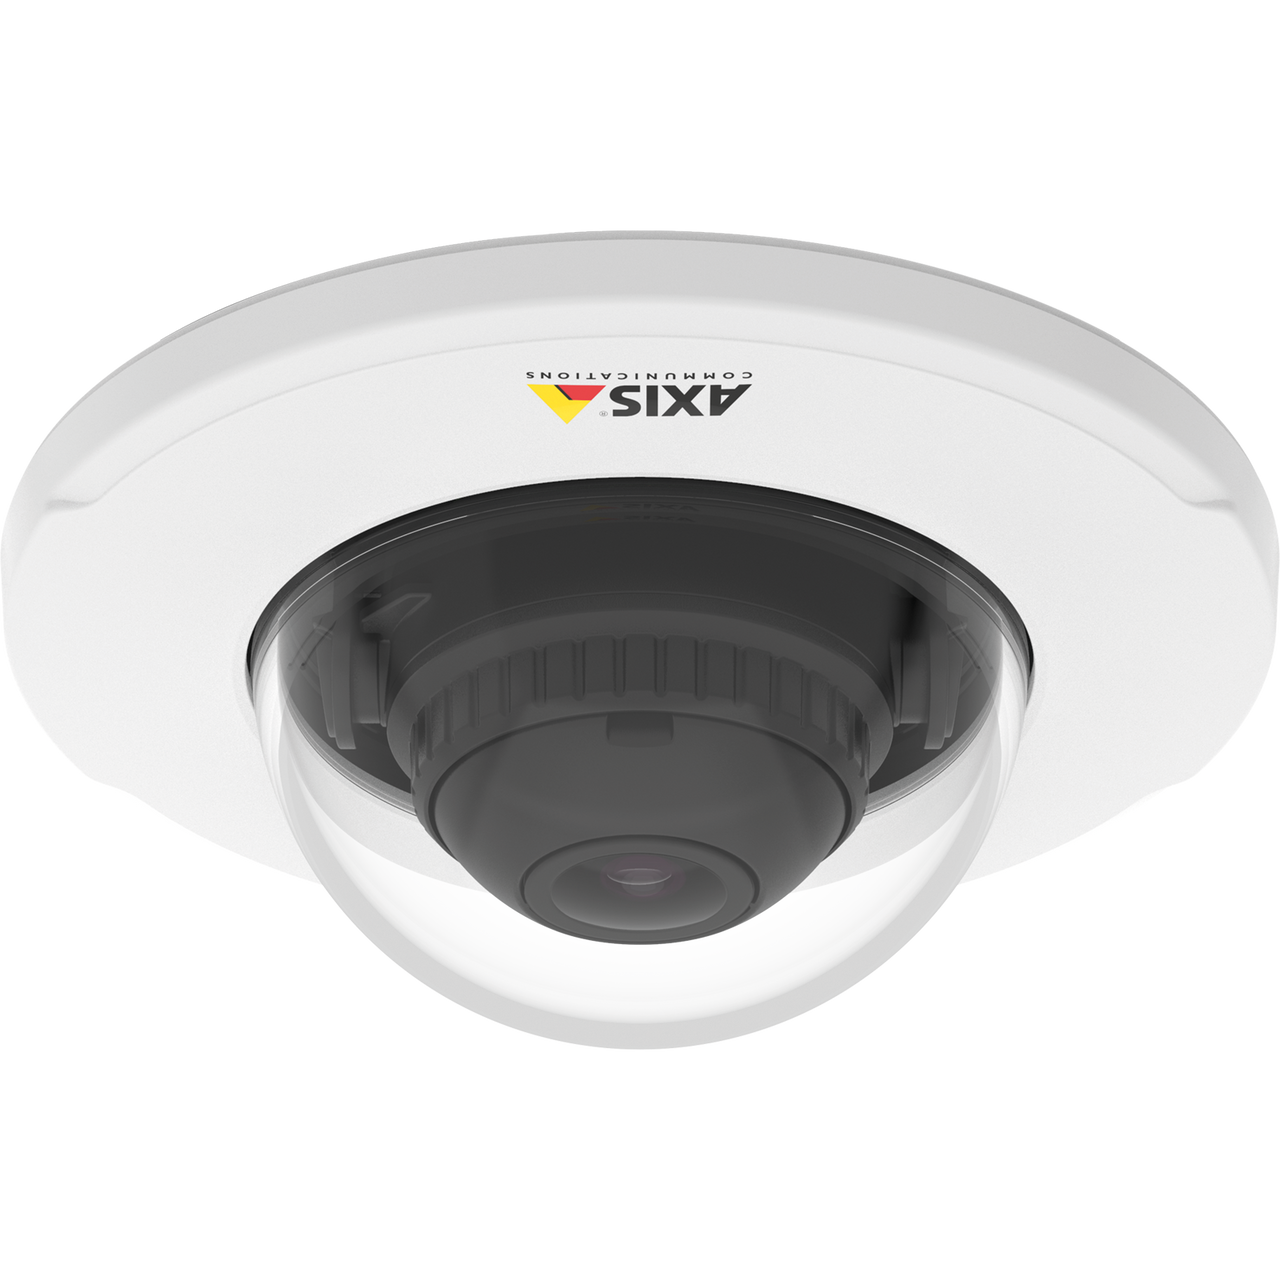 AXIS M3016 Ultra-discreet, recessed-mount 3 MP fixed mini dome